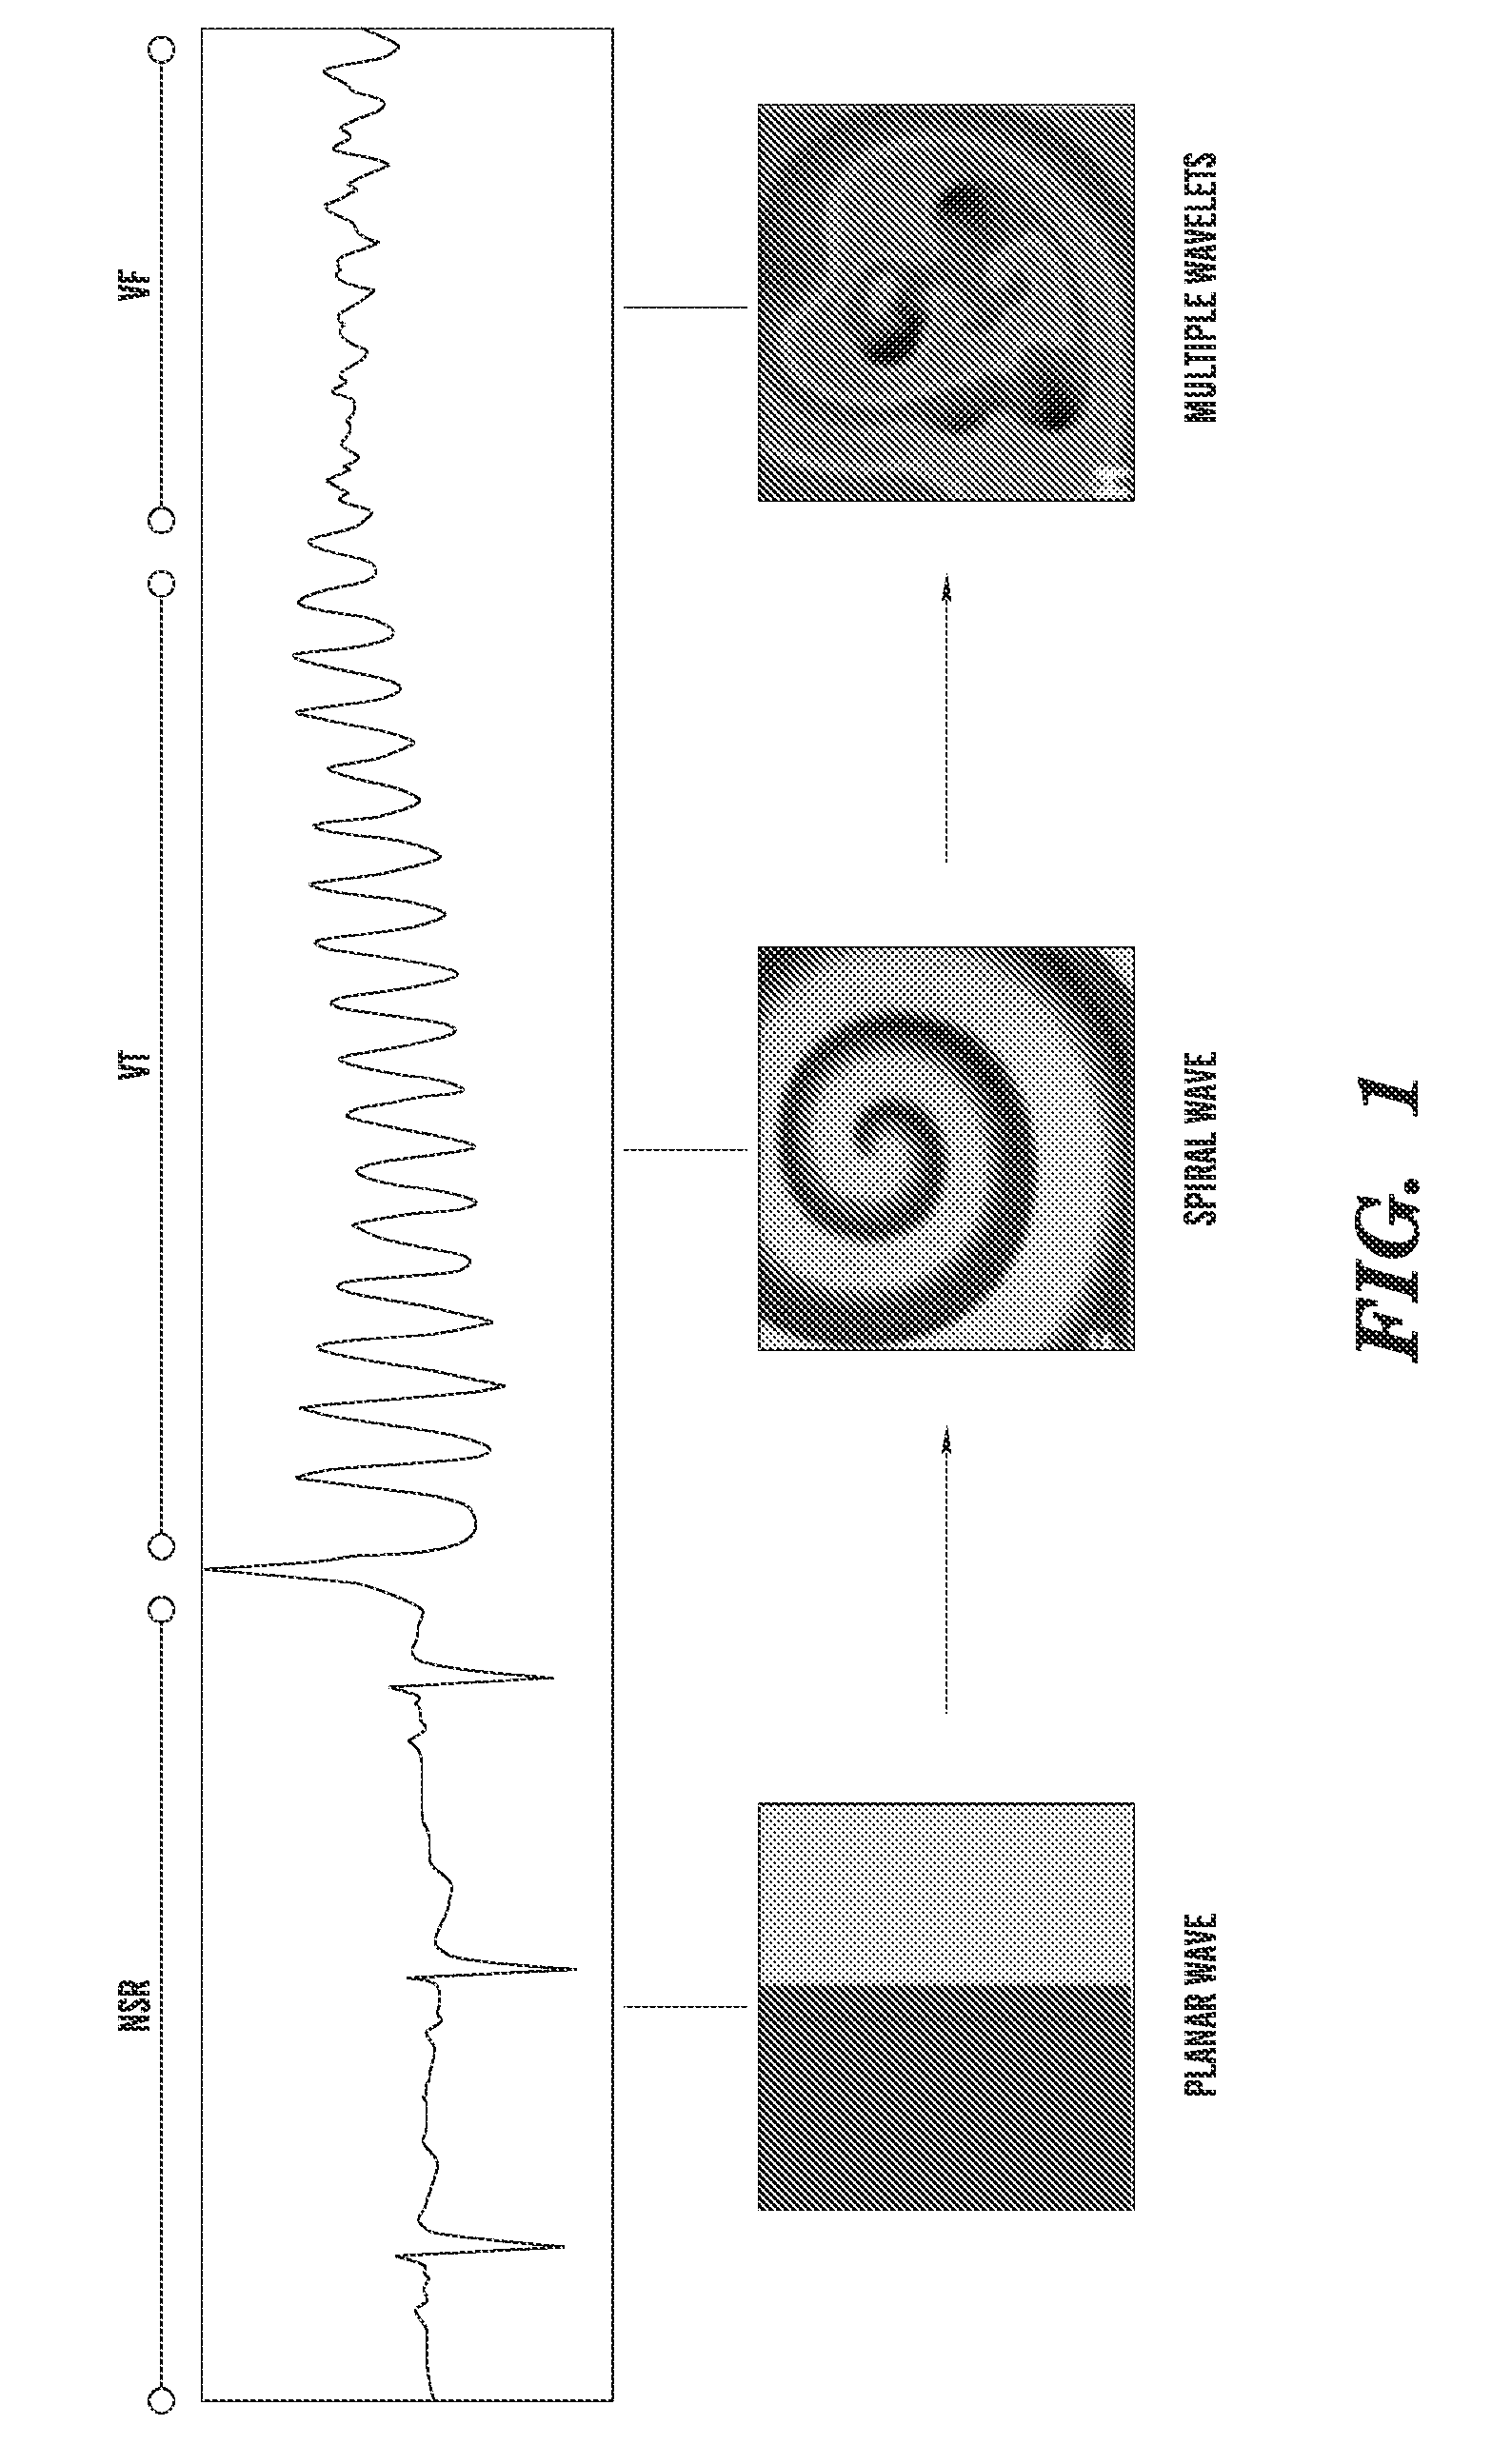 Method of identifying strategies for treatment or prevention of ventricular fibrilation and ventricular tachycardia